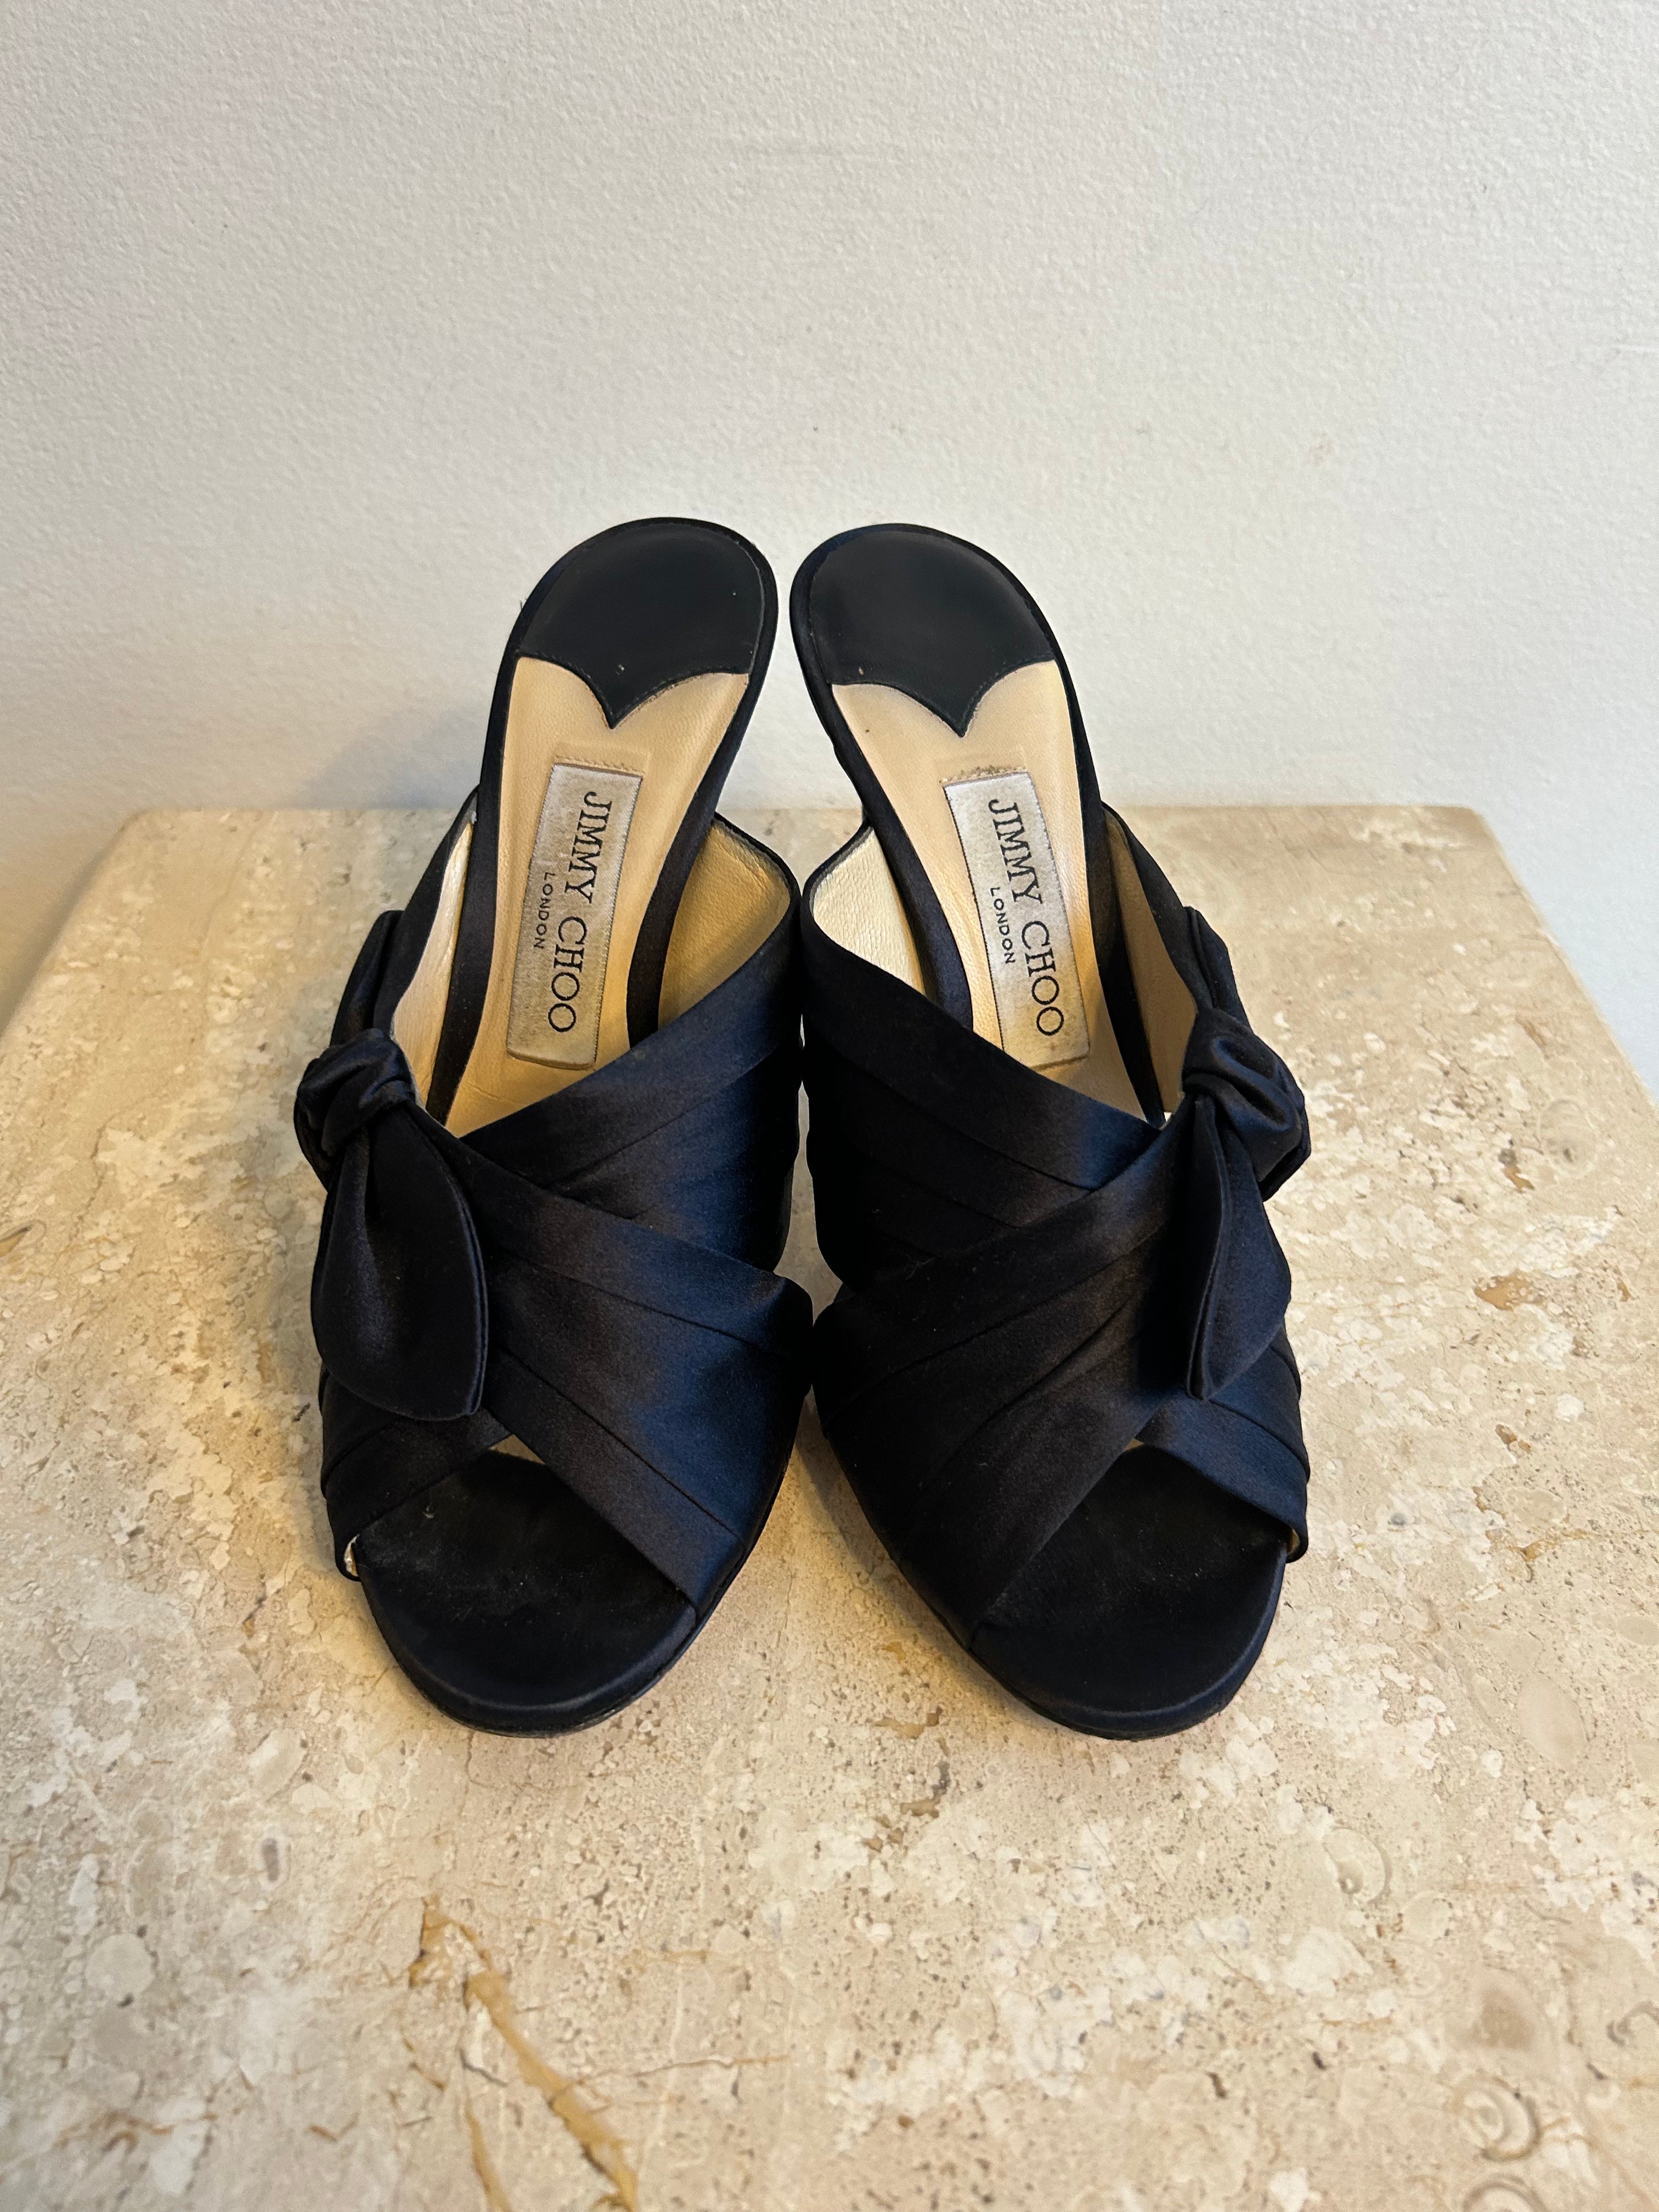 Pre-Owned JIMMY CHOO Navy Satin Keely Sandal 100mm - Size 38.5